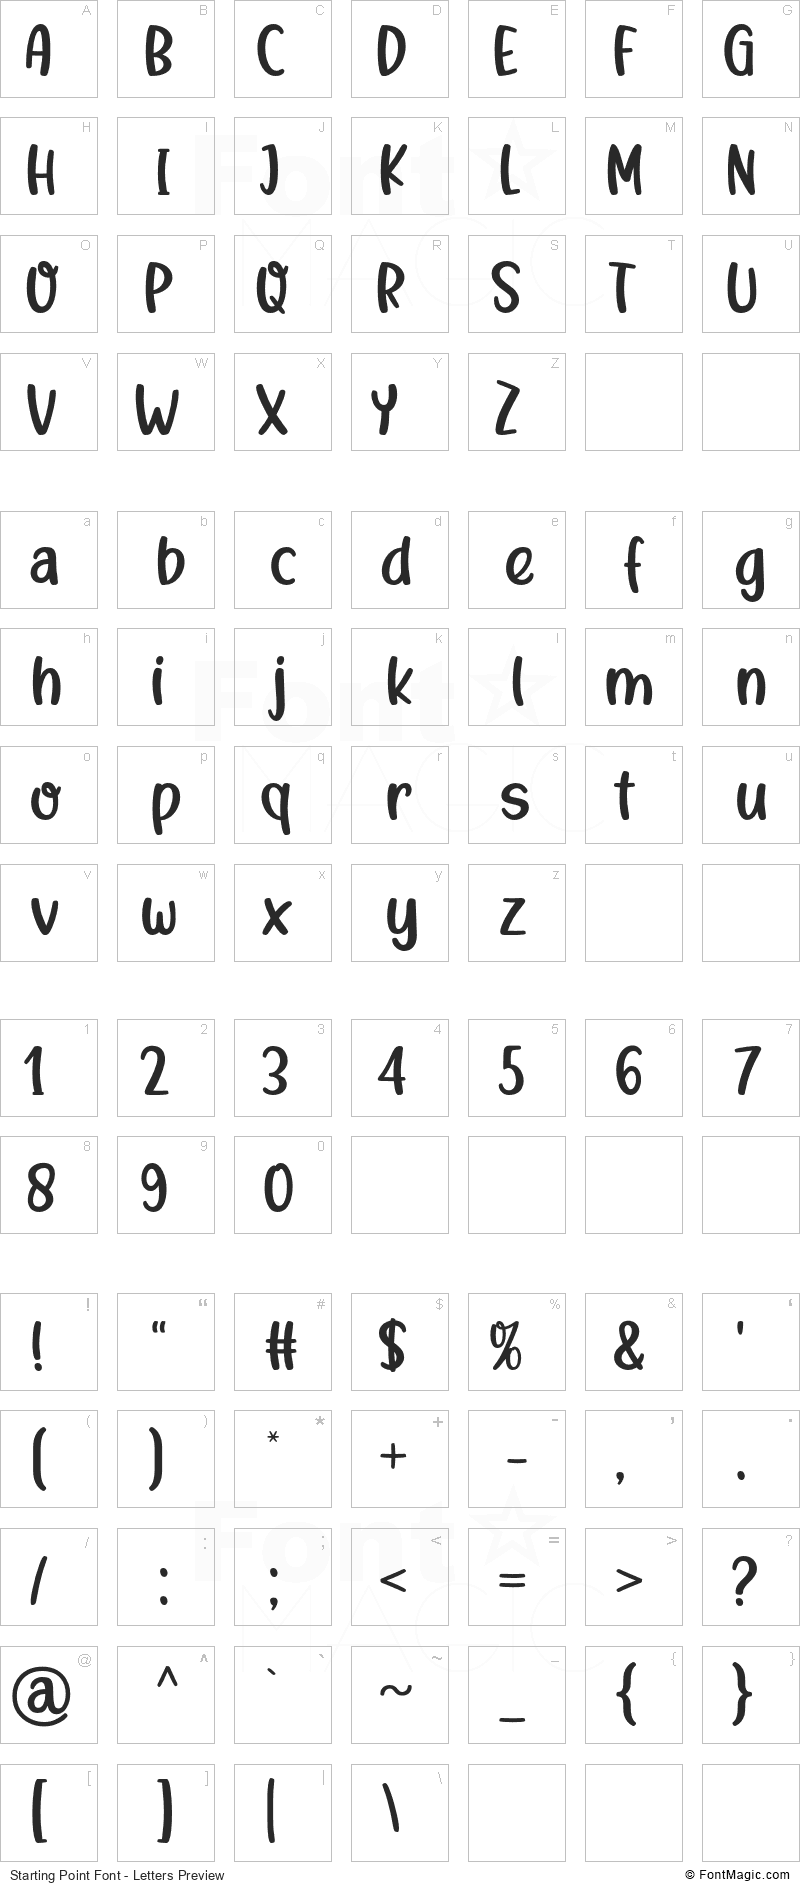 Starting Point Font - All Latters Preview Chart